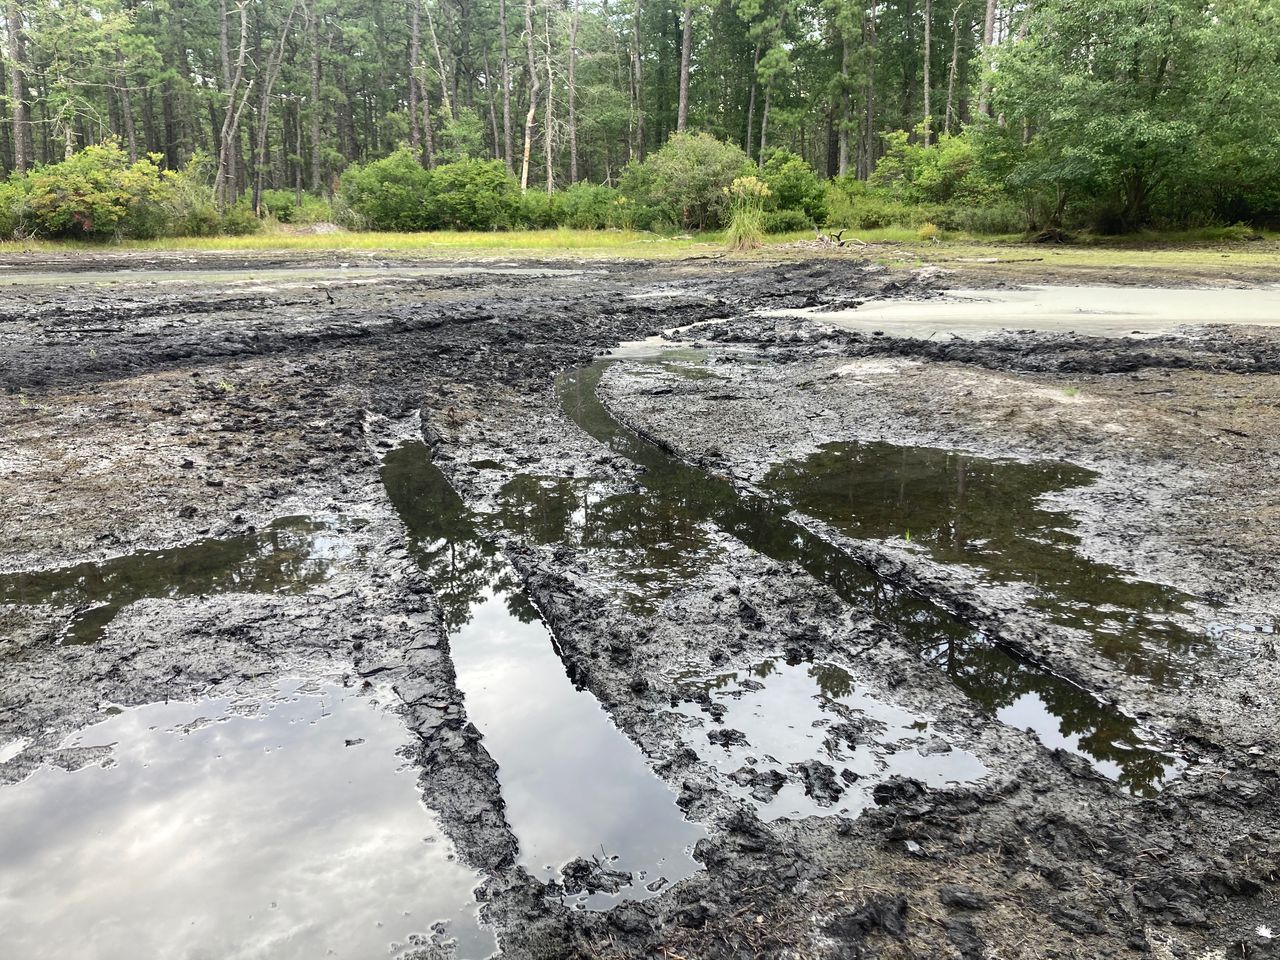 Illegal off-road vehicles continue to tear up N.J. forests. Advocates push for crackdown.